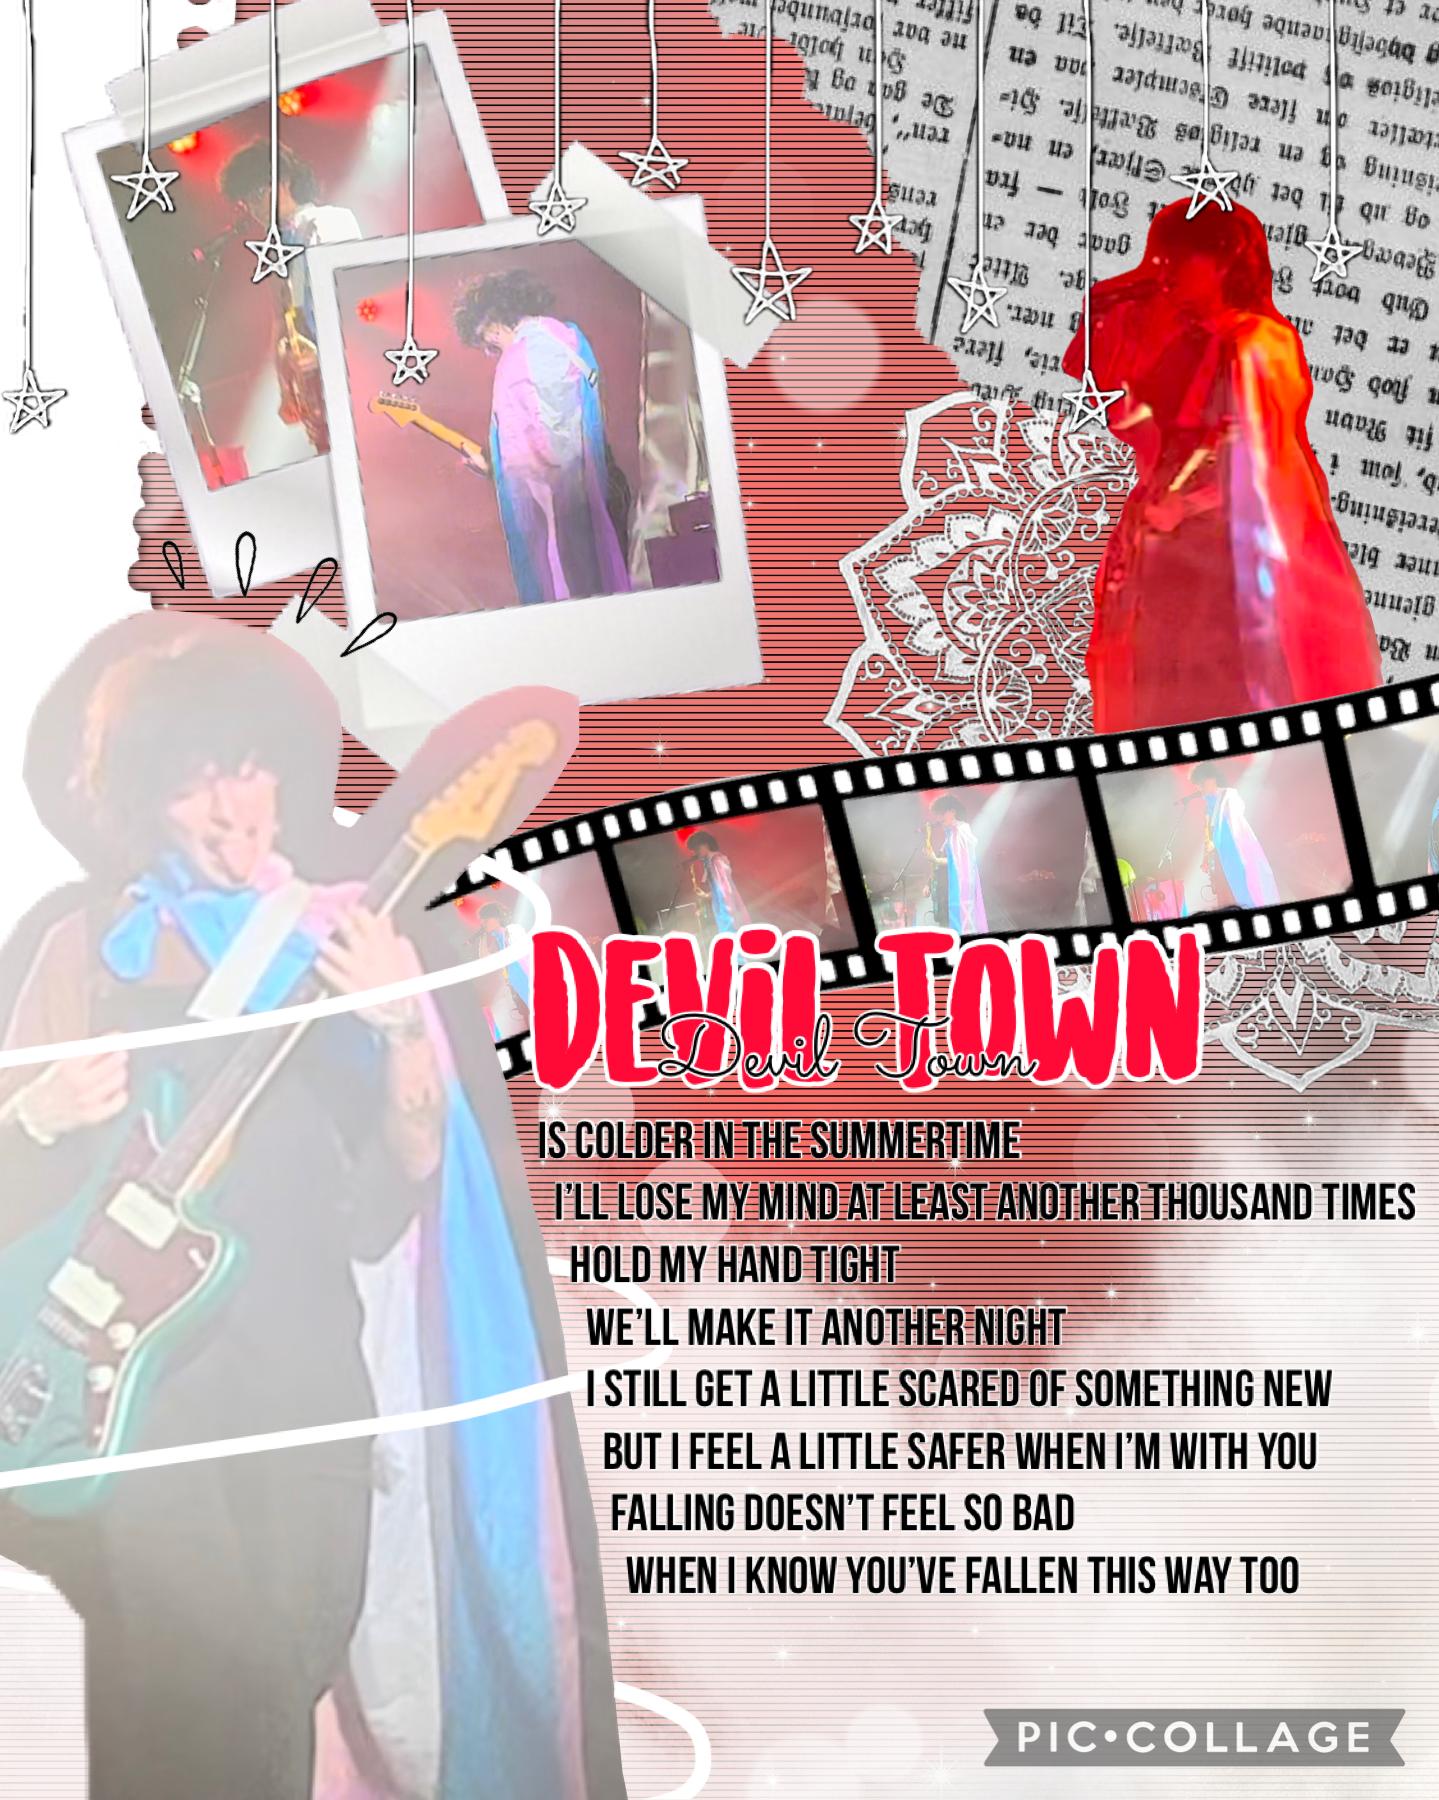 ❤️ TAP 🖤
❤️ ‘Devil Town’ by Cavetown collage!🖤
❤️ these photos r photos i got live in glasgow while he was performing ‘Devil Town’ lol
❤️ hope u like it and ily <3 🖤
❤️🖤